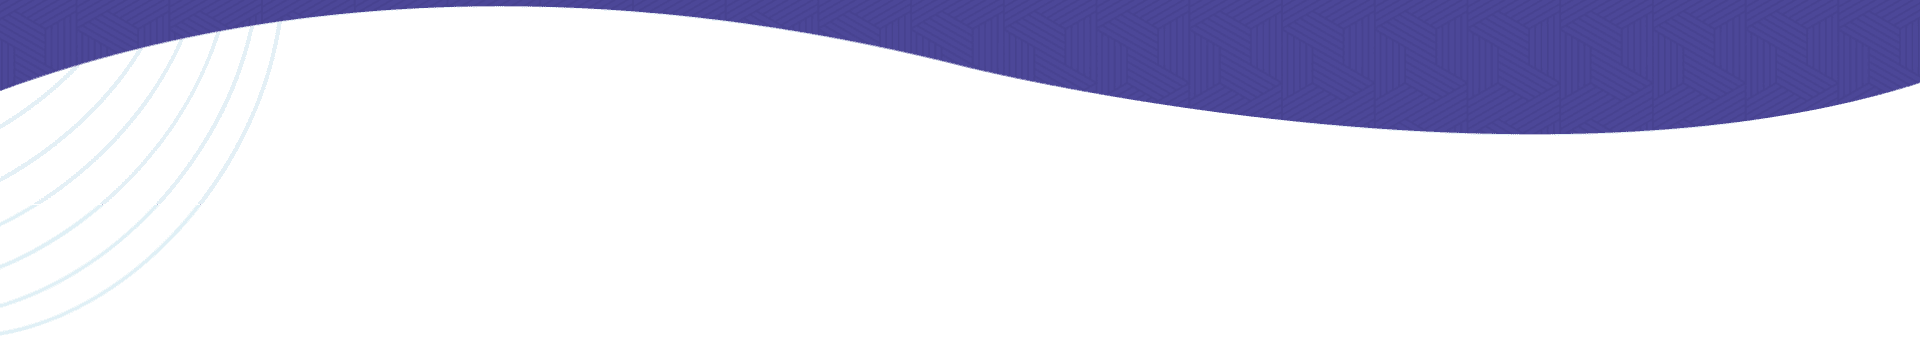 A blue, white and green flag with a diagonal line.